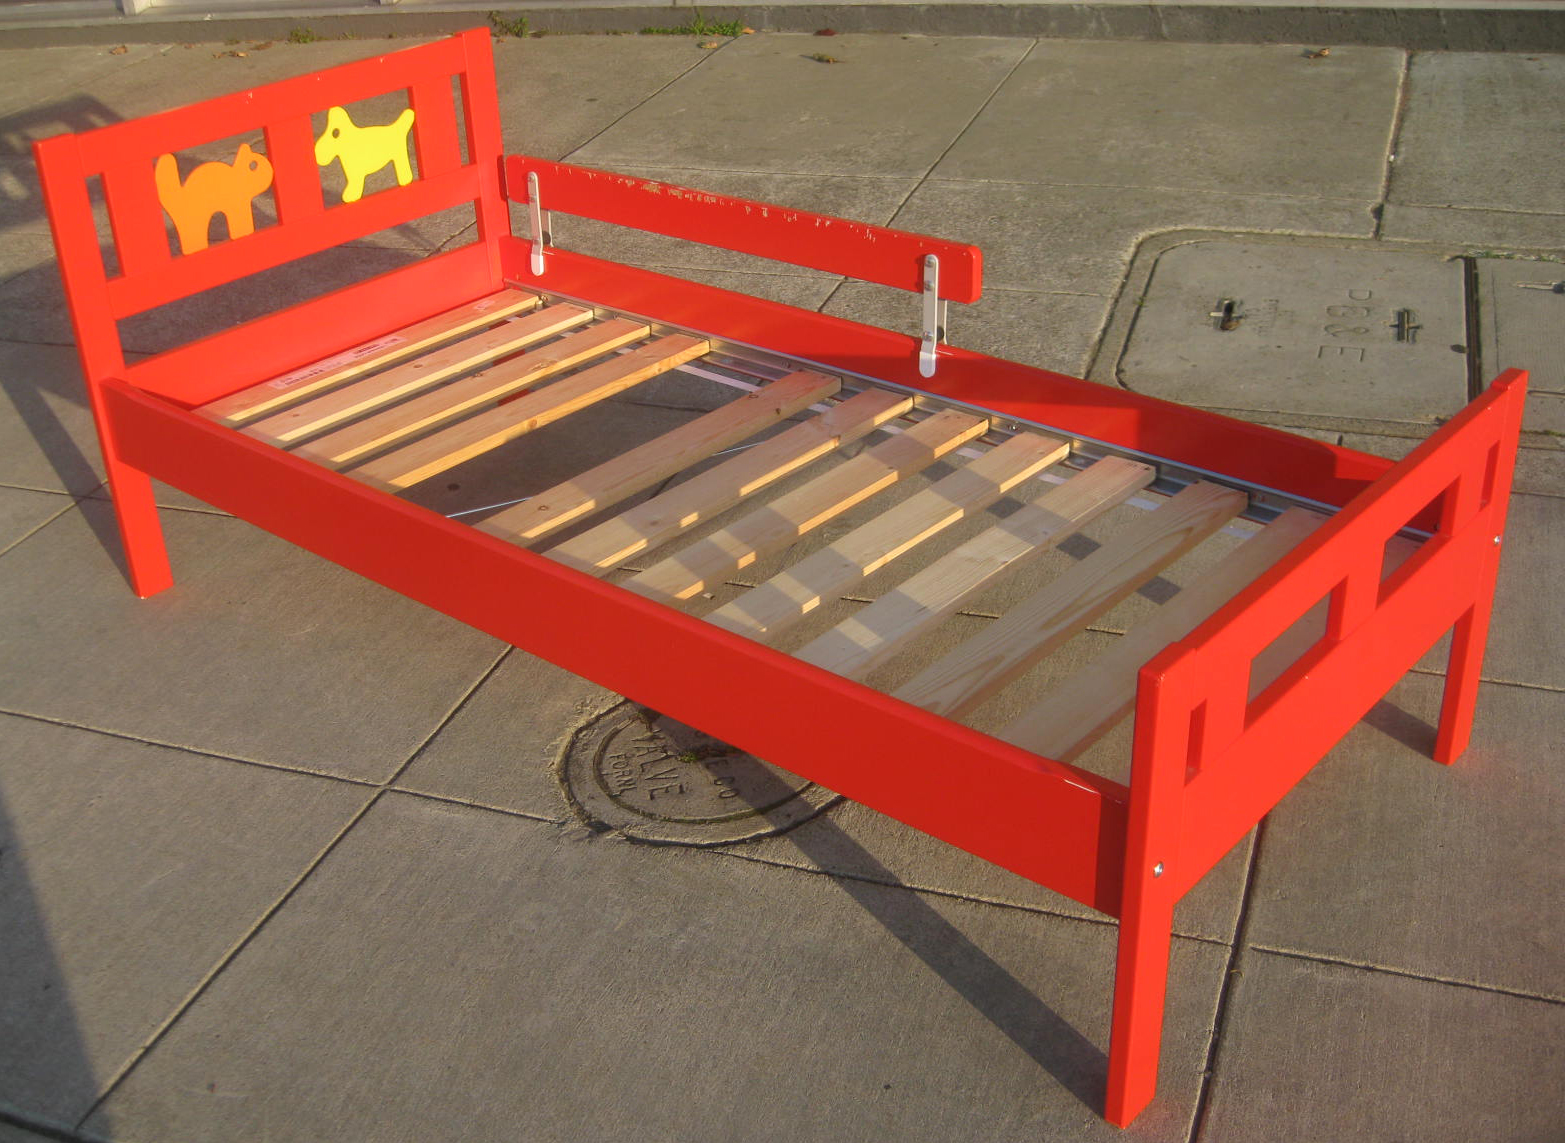 UHURU FURNITURE & COLLECTIBLES: SOLD - Red Toddler Bed - $35